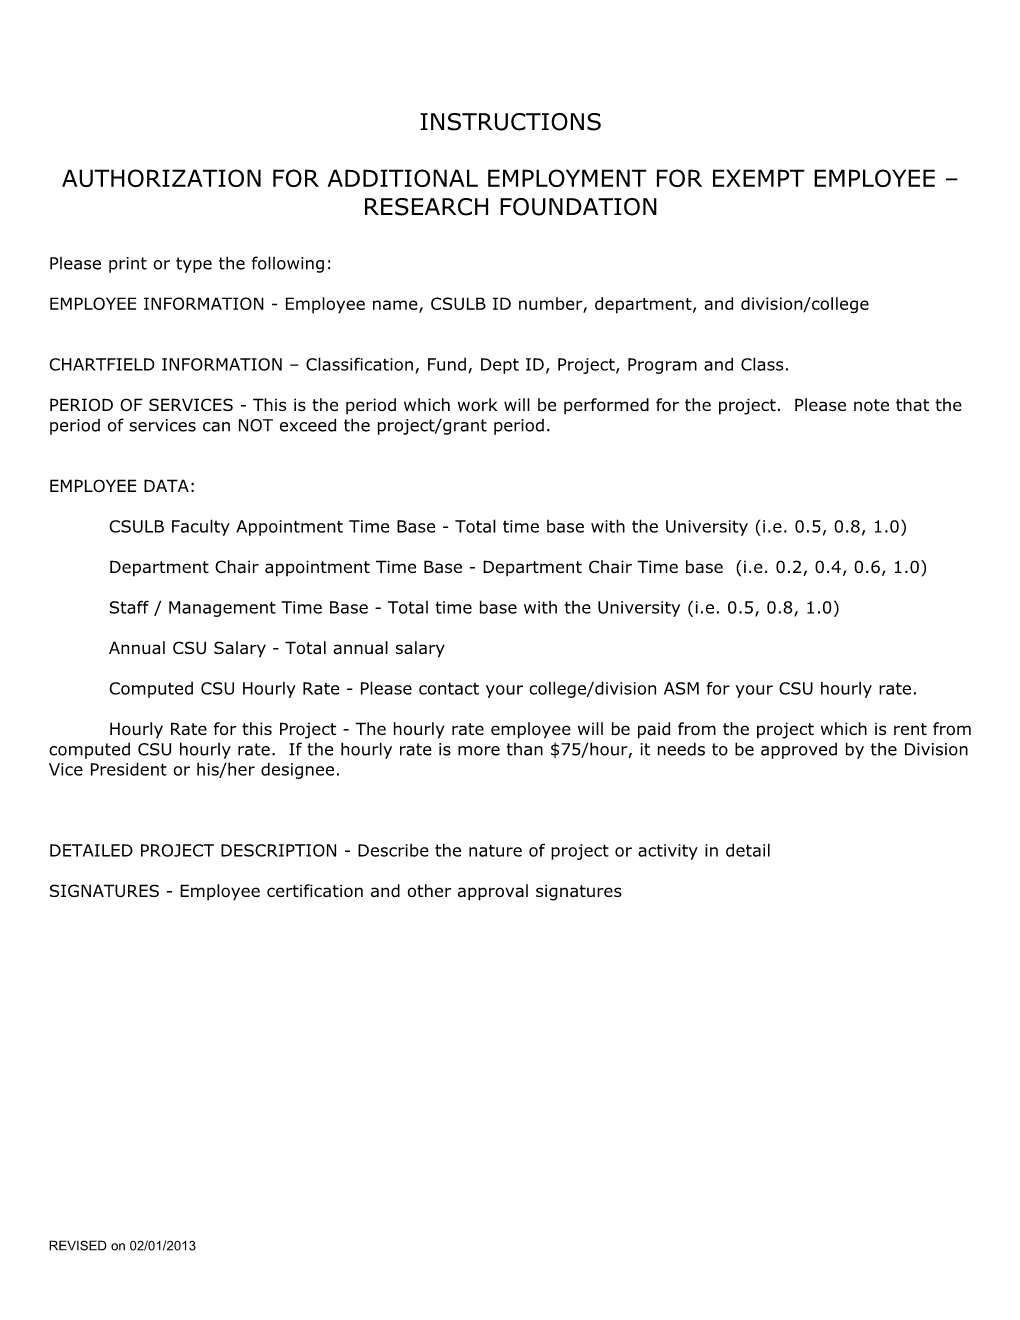 Authorization for Additional Employment by Exempt Employee